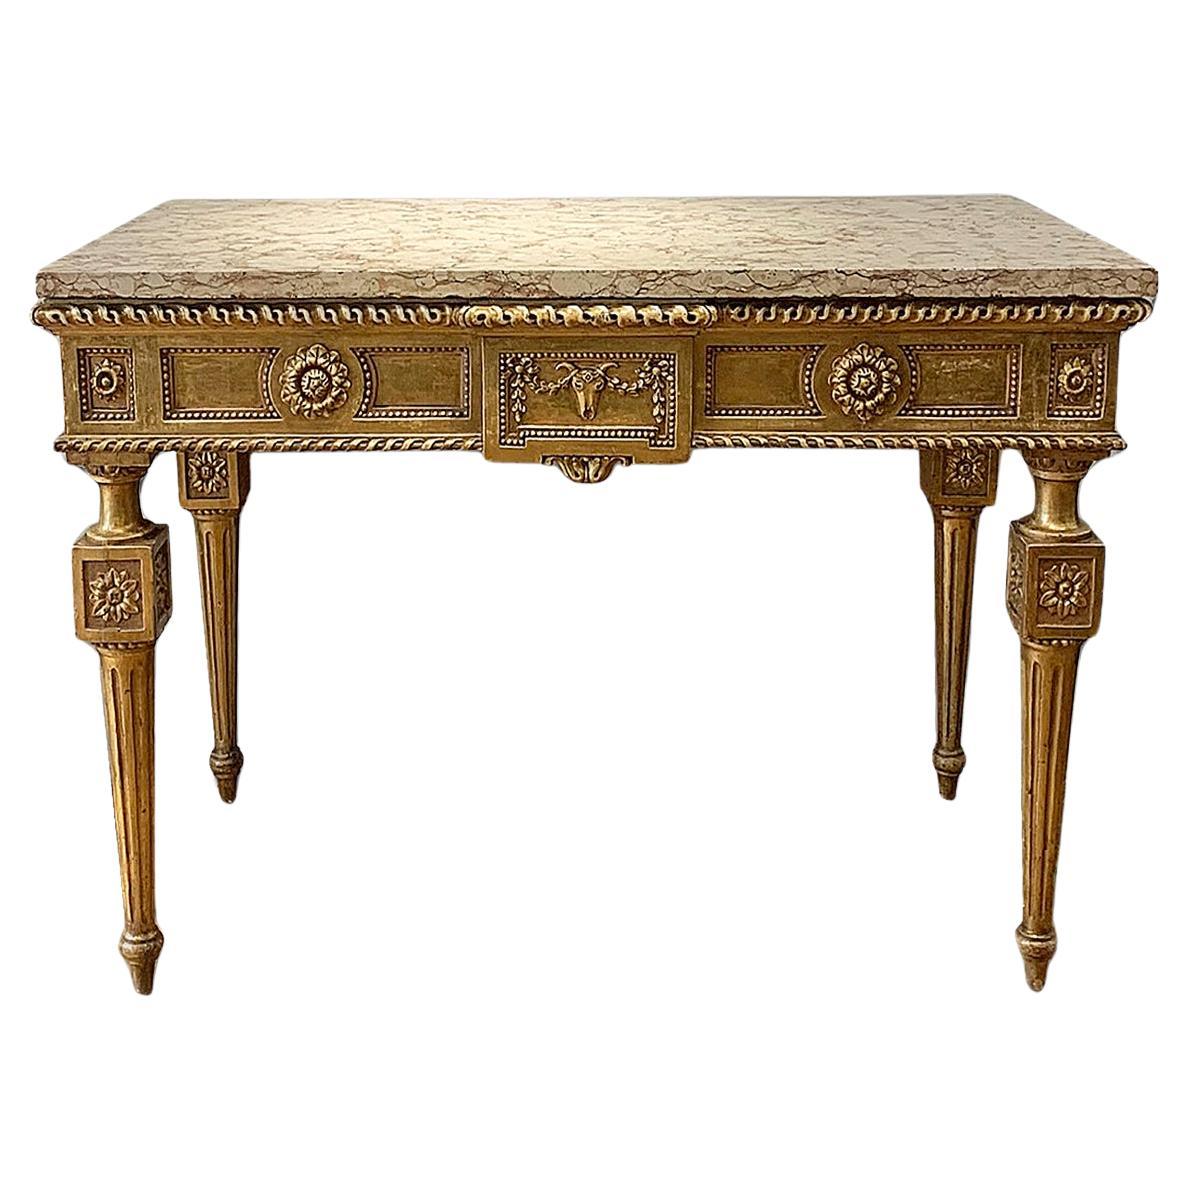 END OF THE 18th CENTURY GOLDEN CONSOLE  For Sale